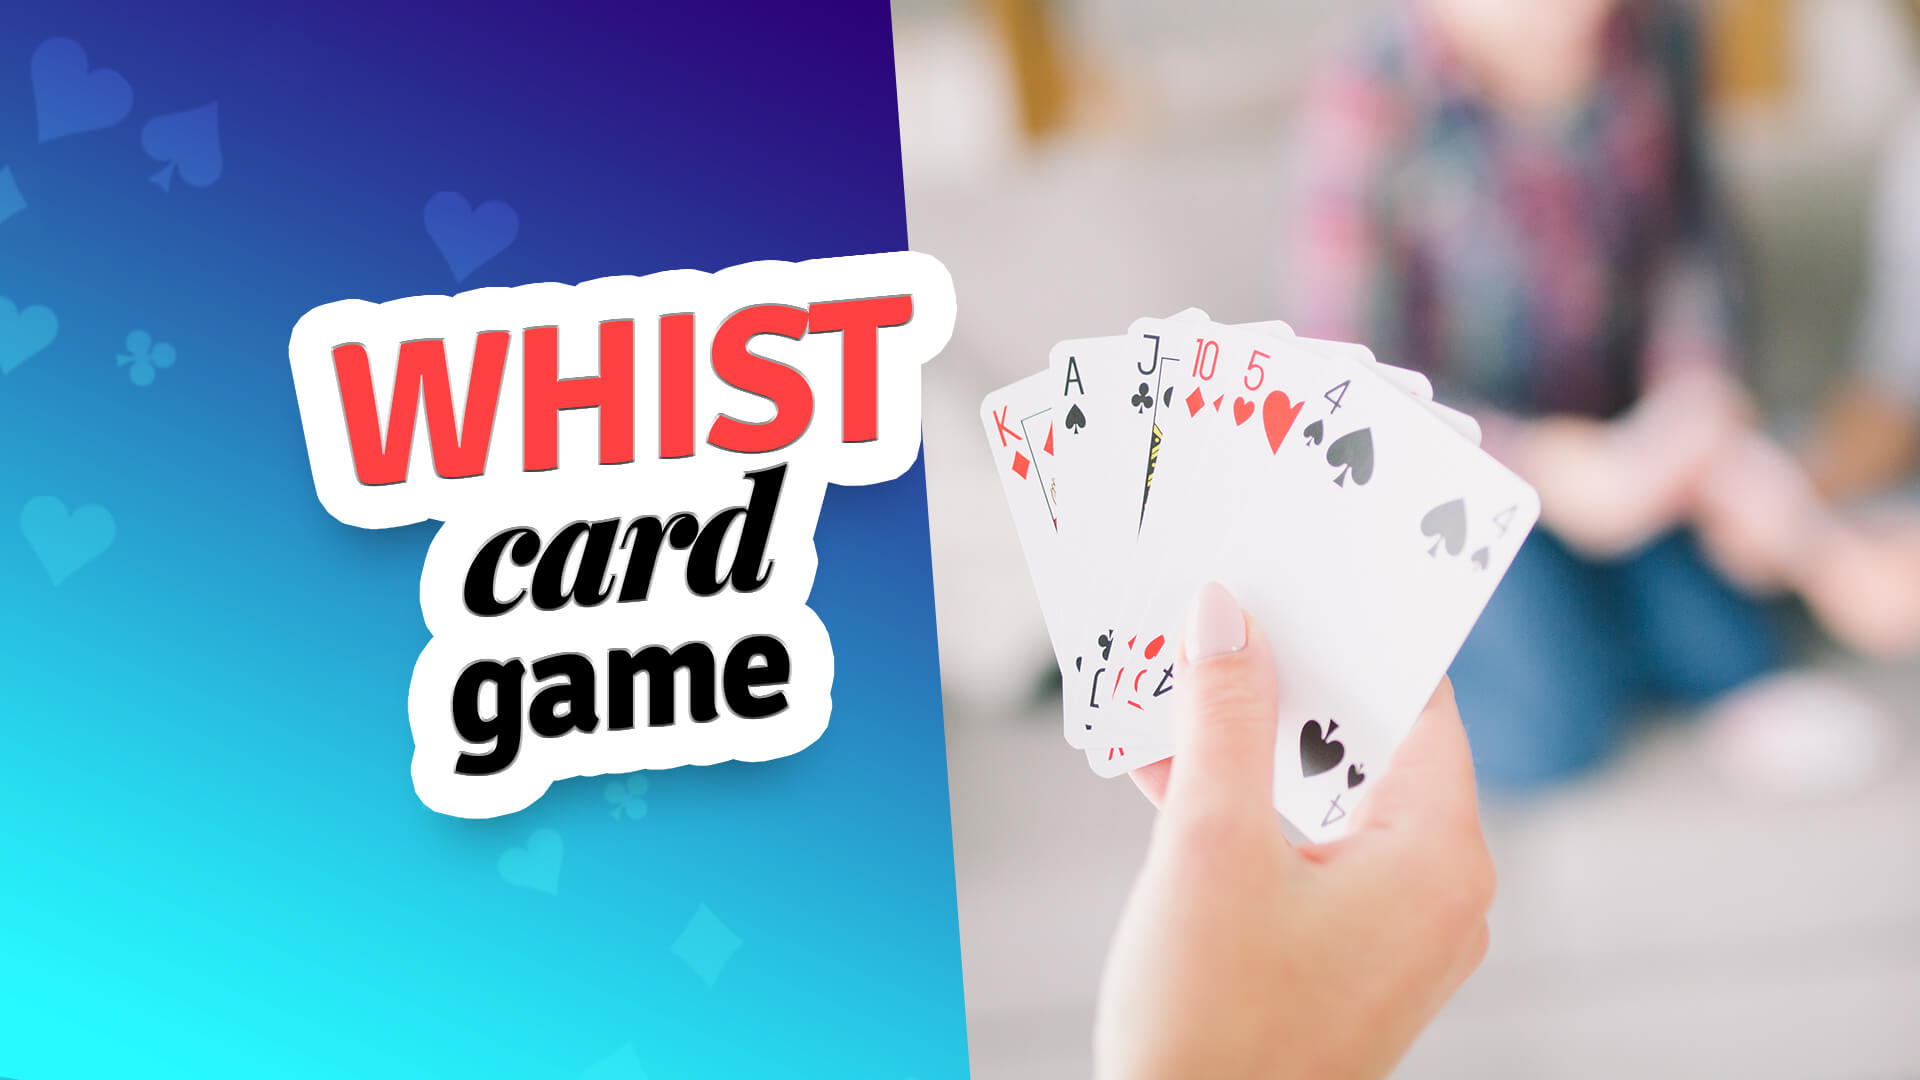 whist card game